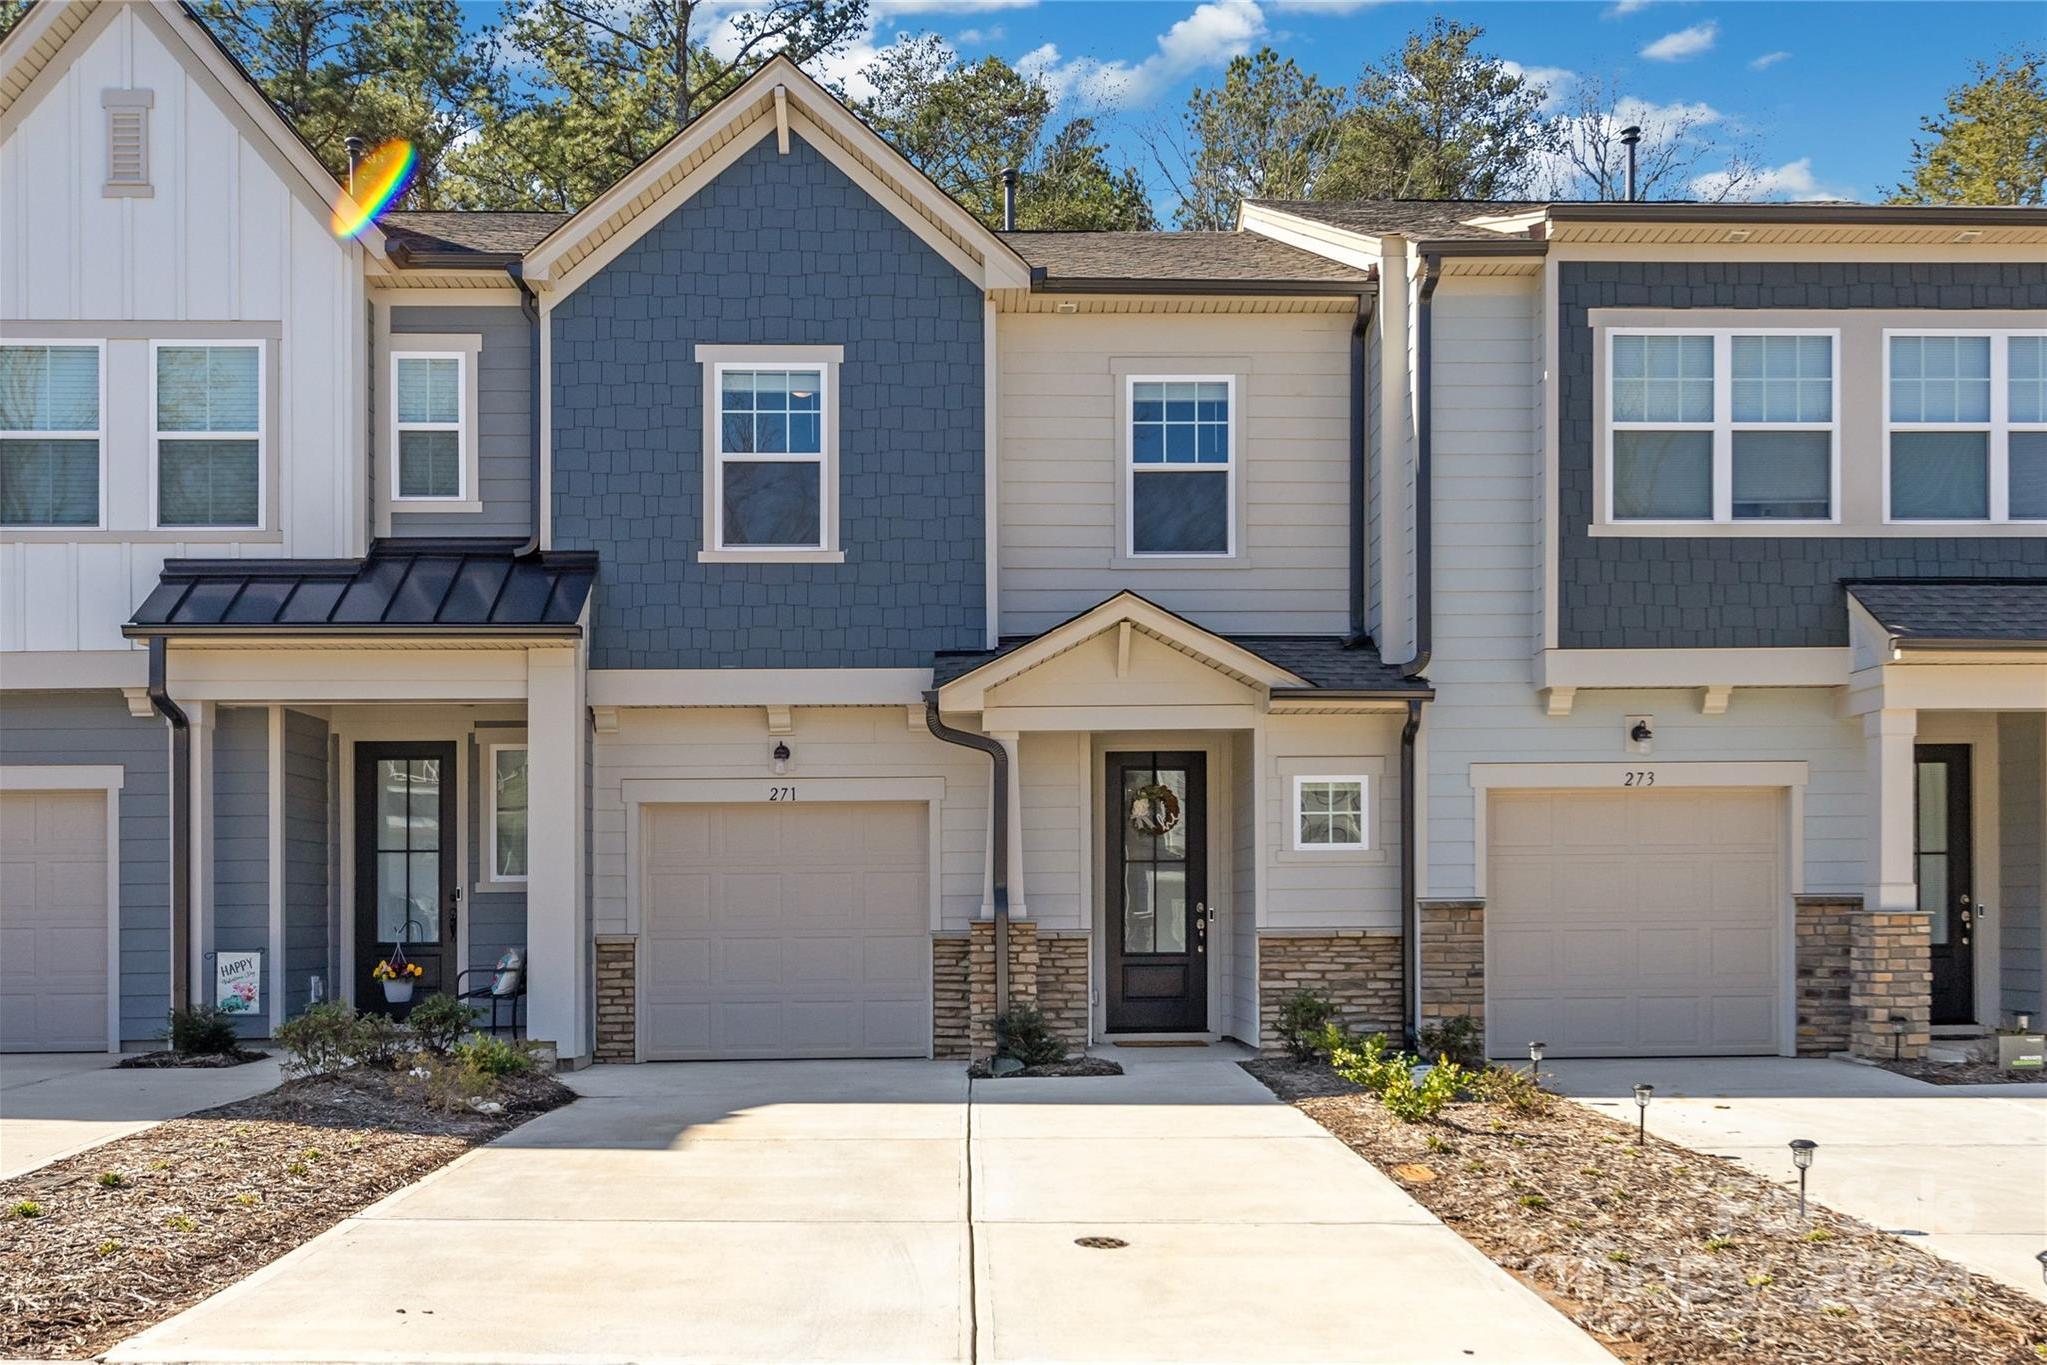 Photo one of 271 Brooks Springs Dr Fort Mill SC 29708 | MLS 4111318